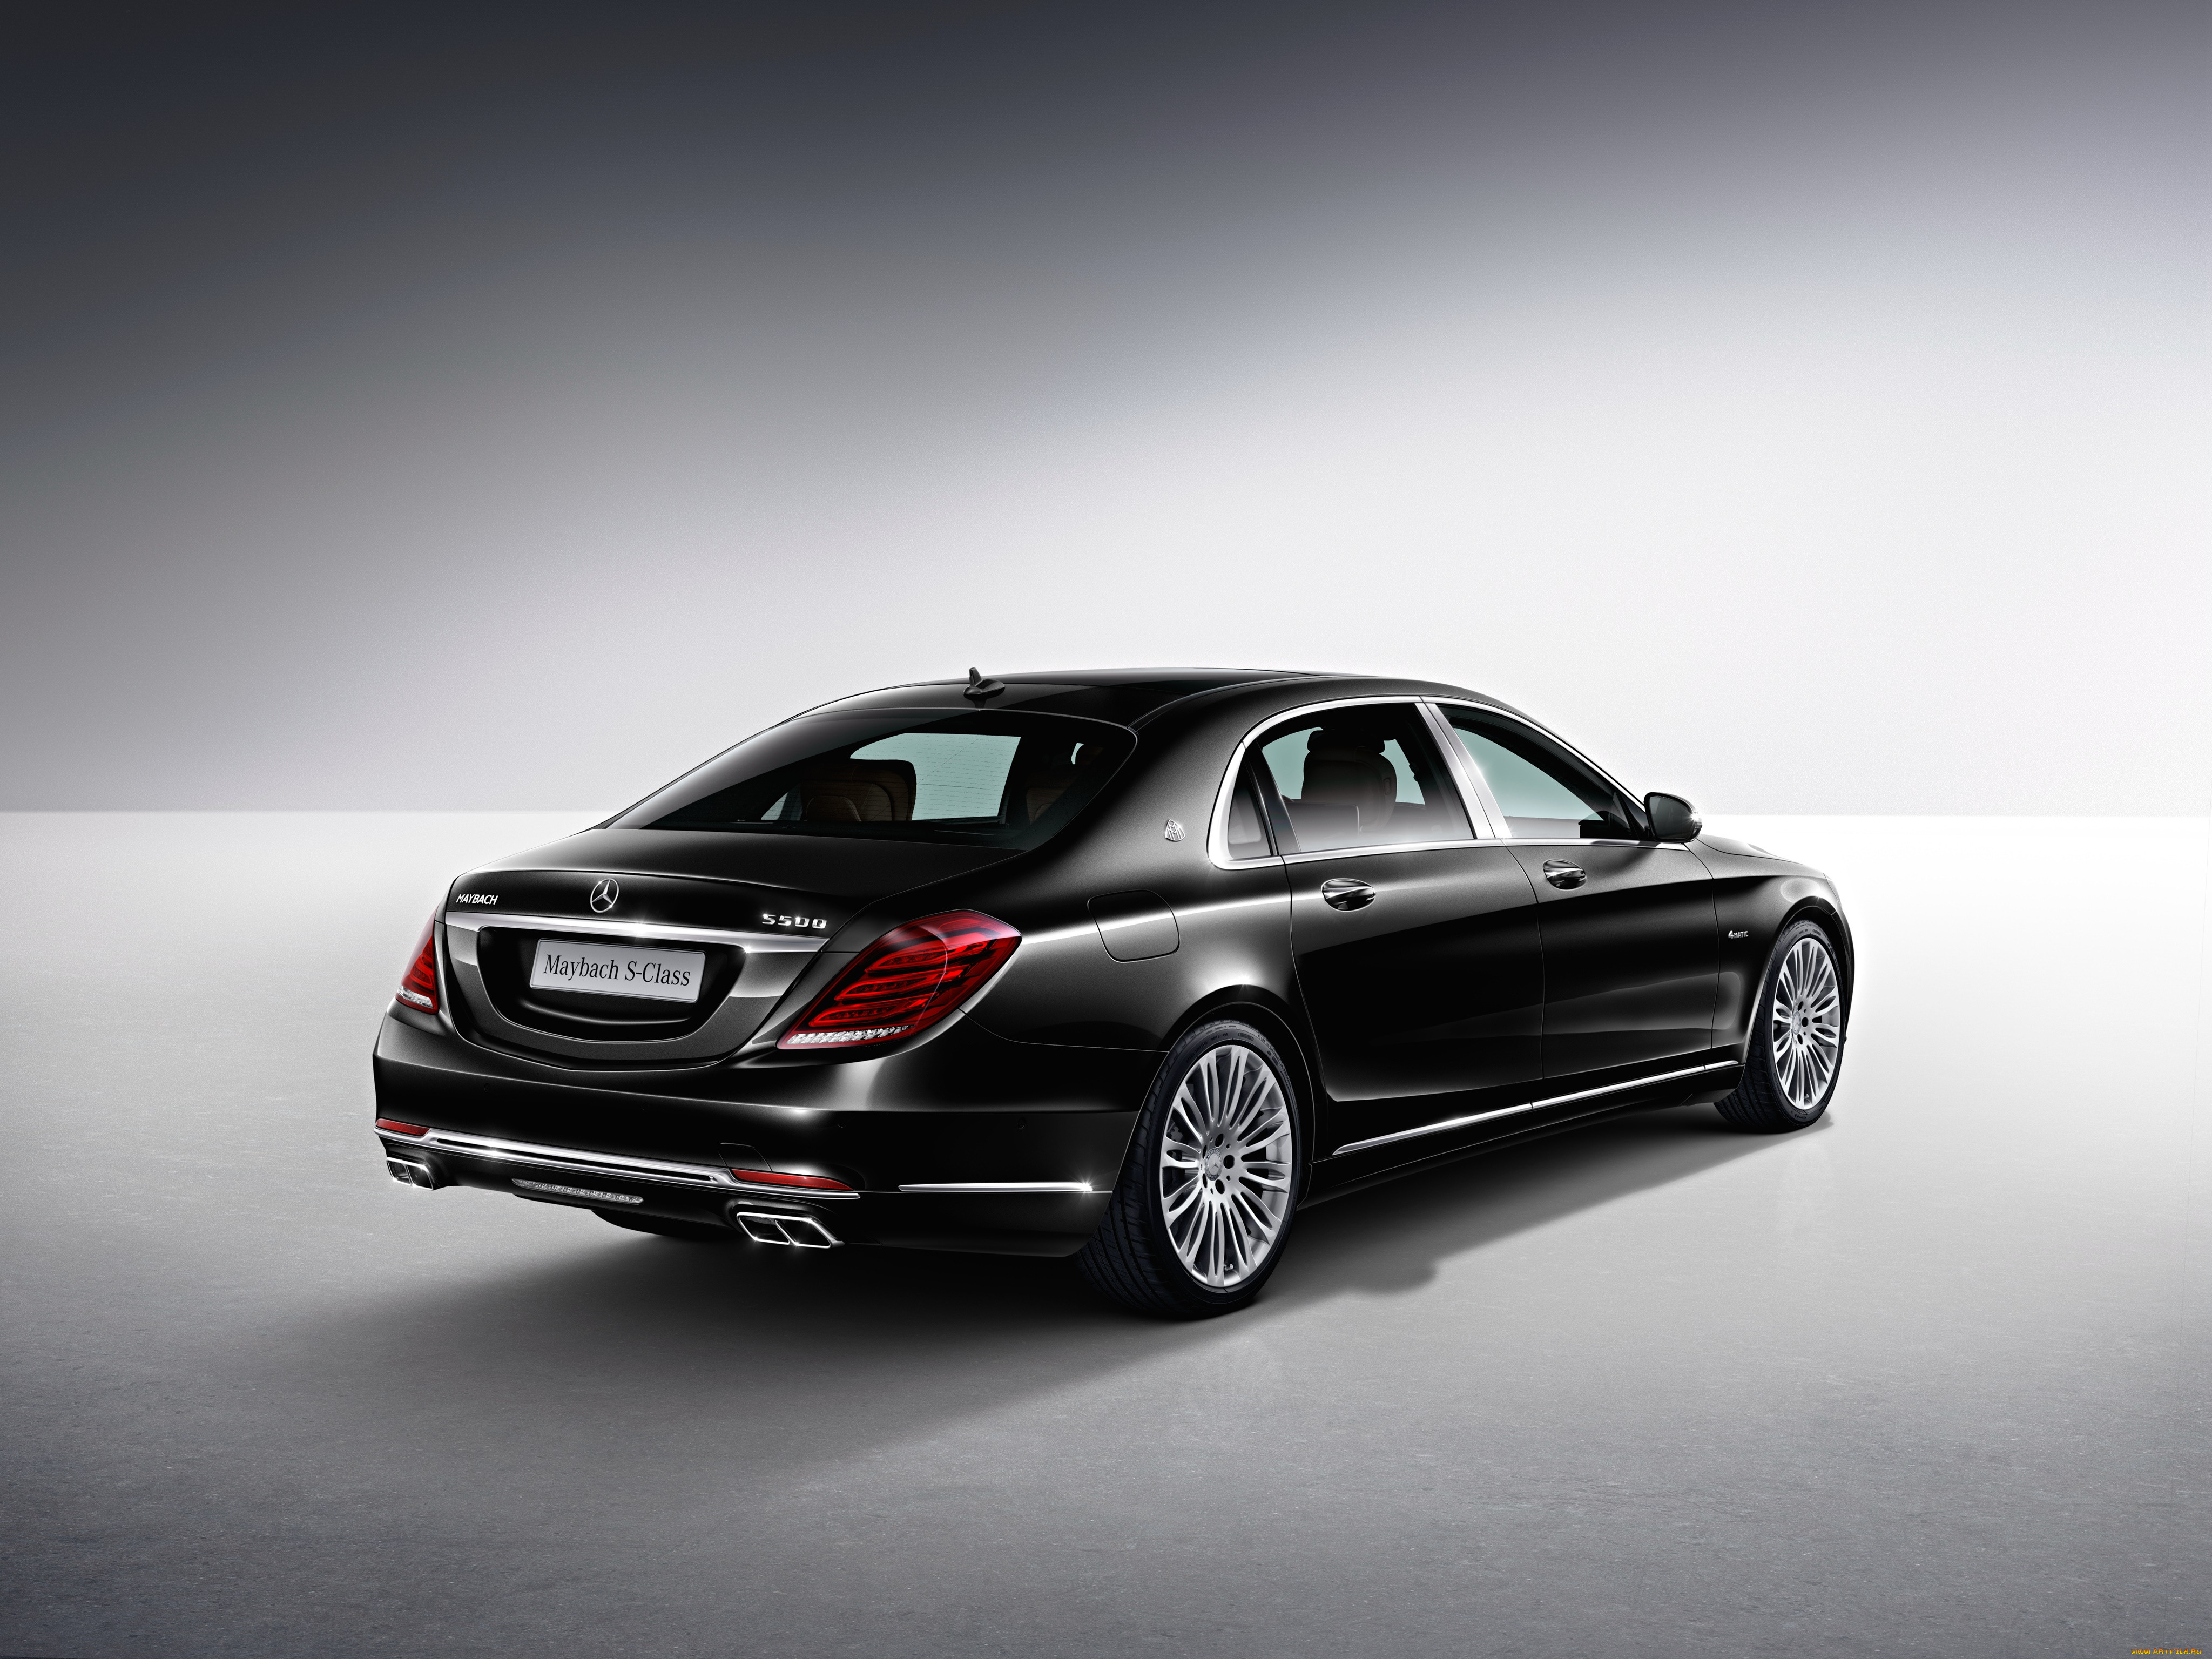 Мерседес s600. Mercedes Benz Maybach s600. Мерседес Бенц s600 Maybach. 2015 Mercedes Benz Maybach s600. Мерседес Benz s600.